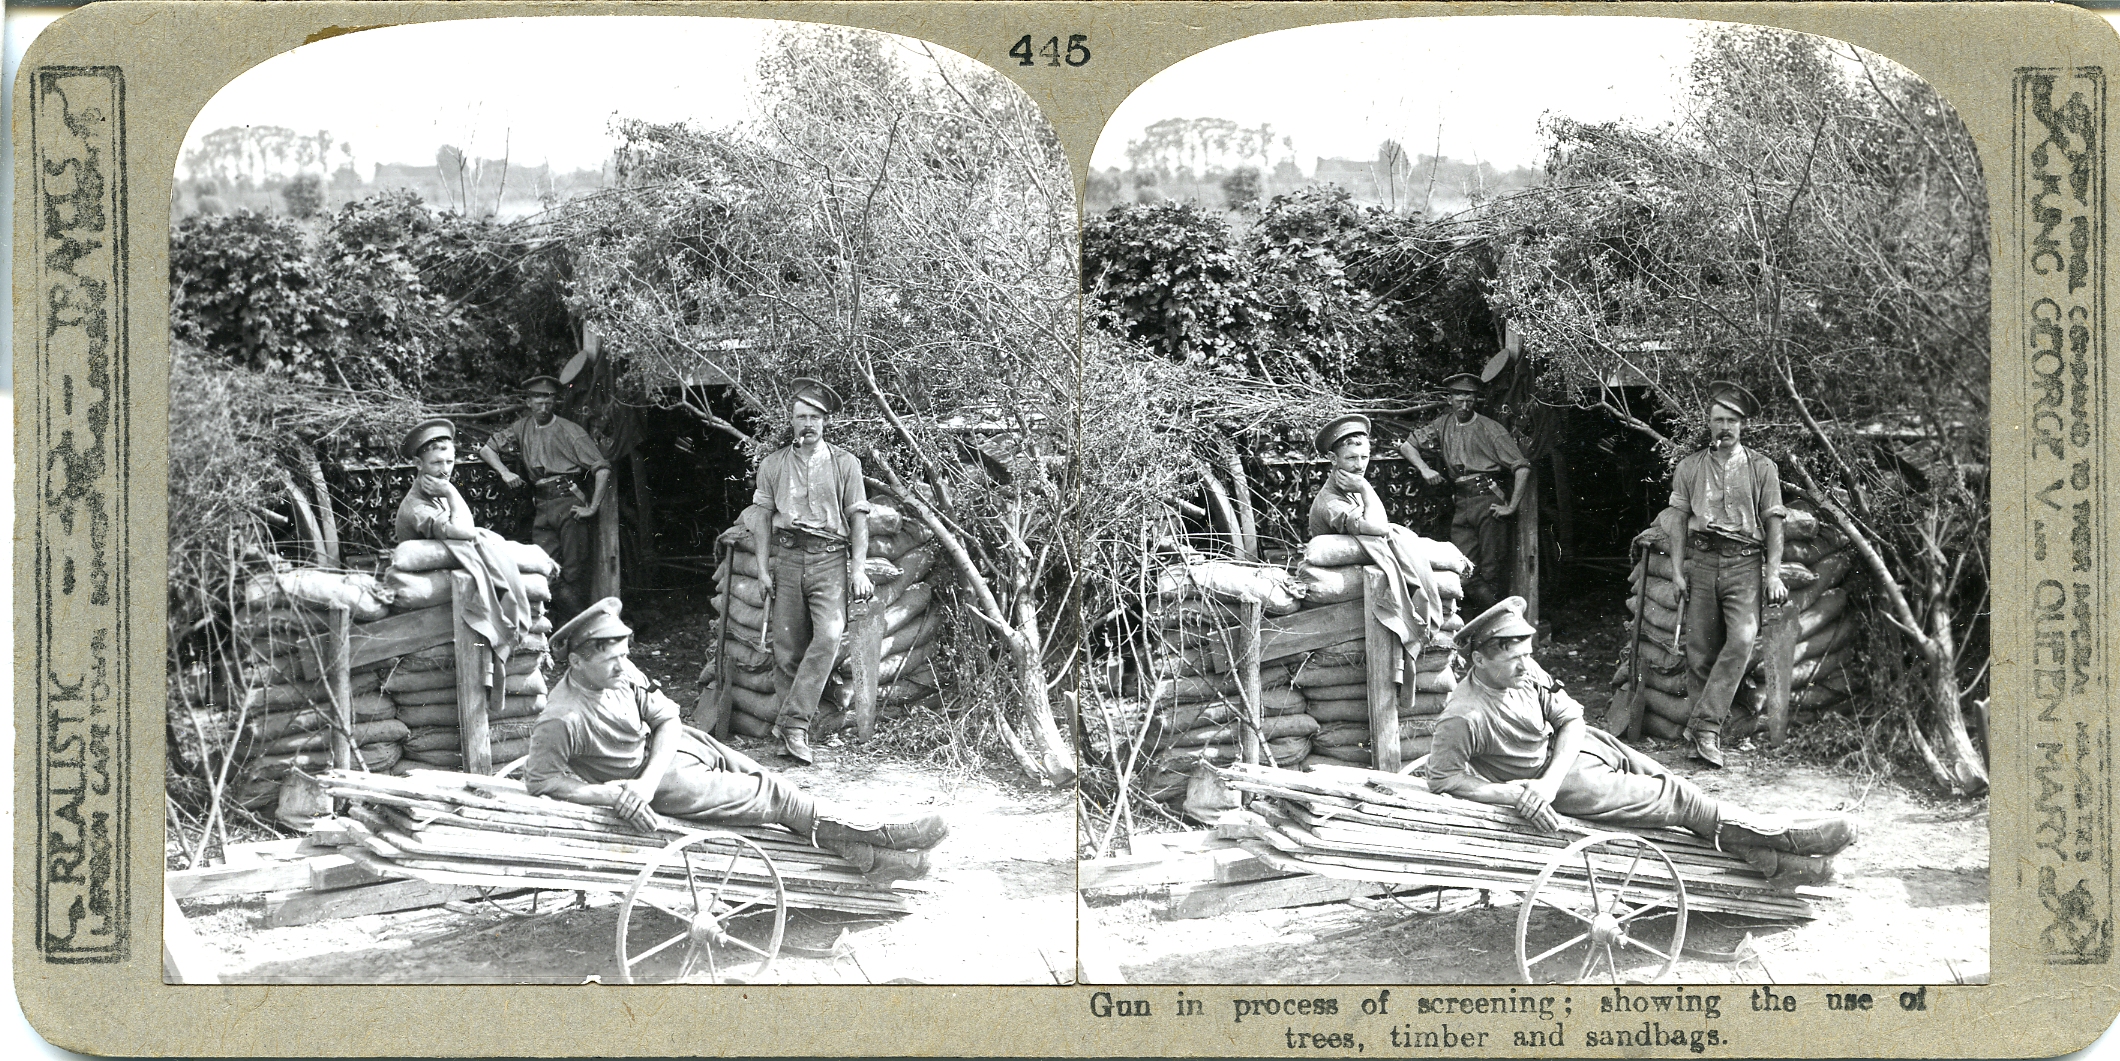 Gun in process of screening: showing the use of trees, timber and sandbags